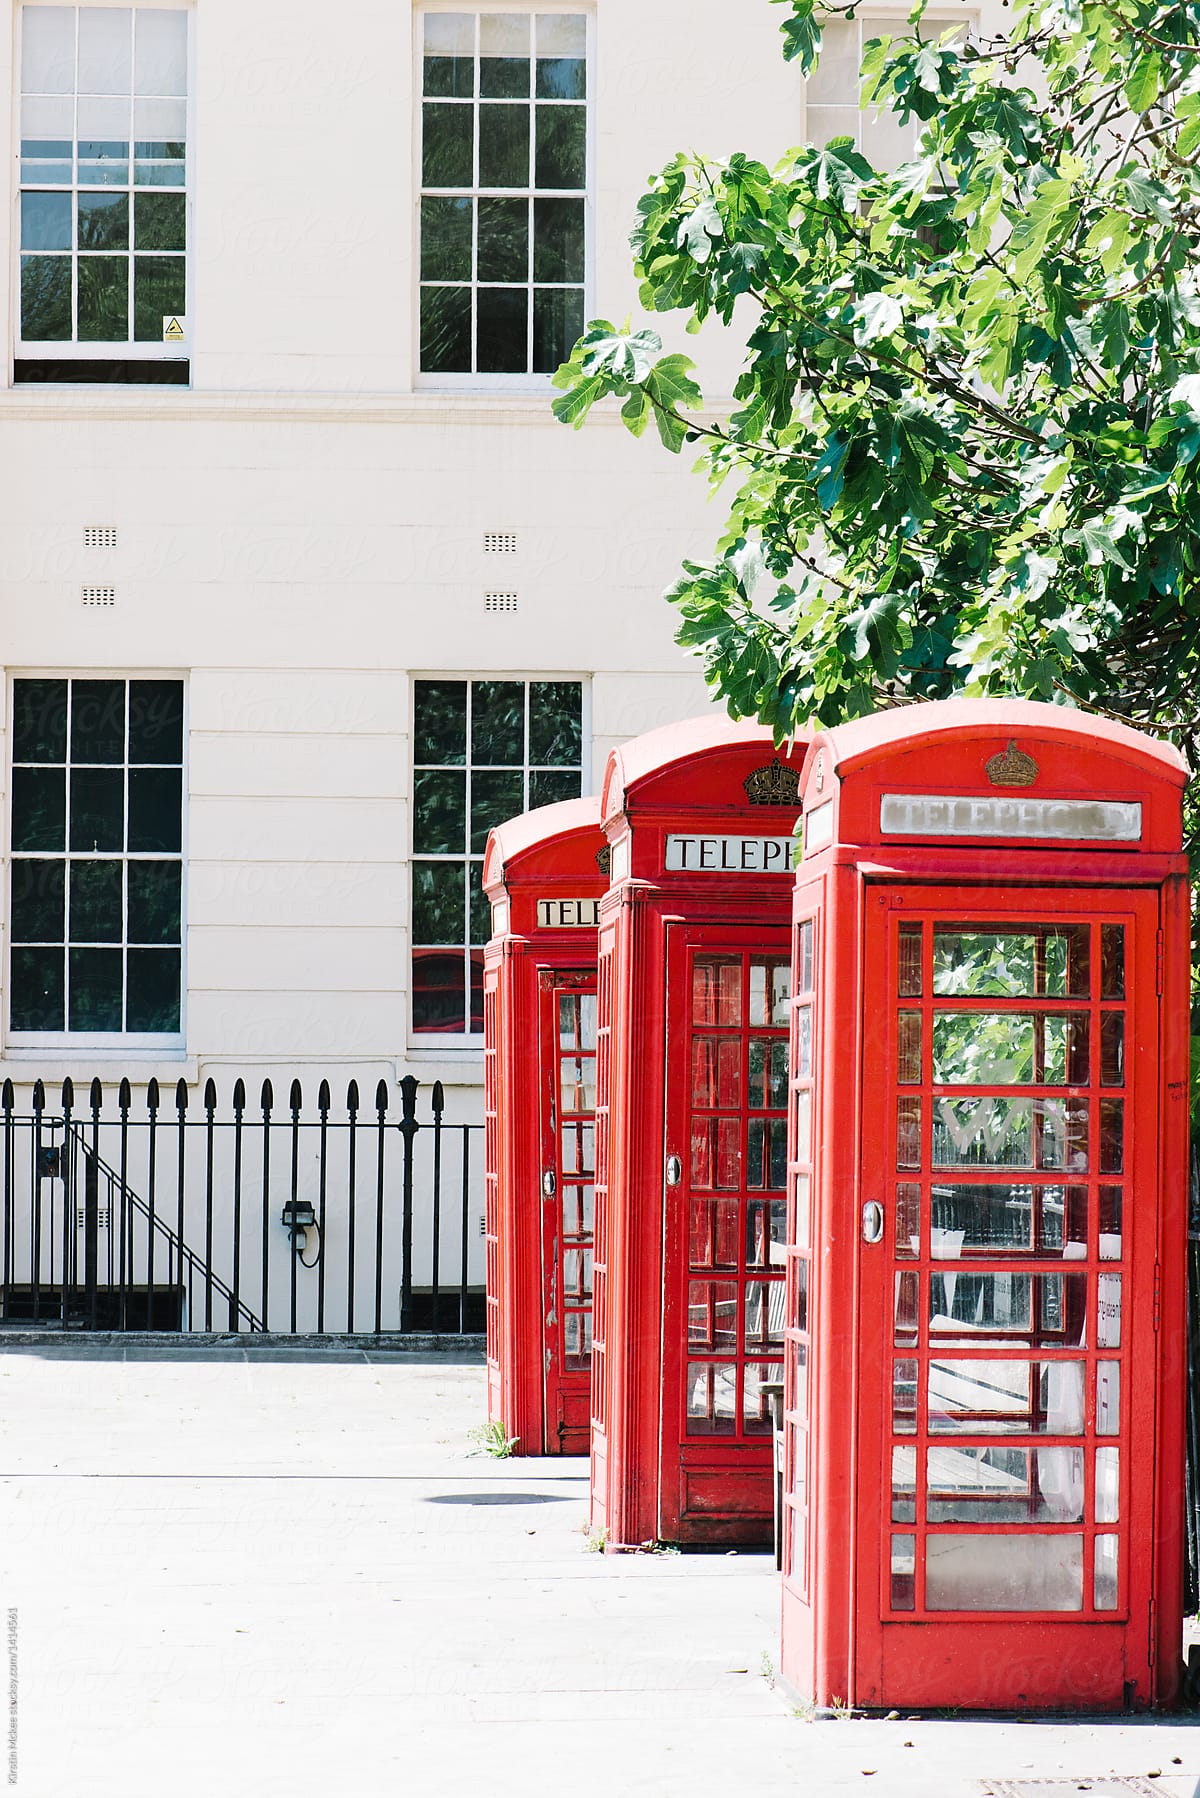 Three Telephone Boxes in London